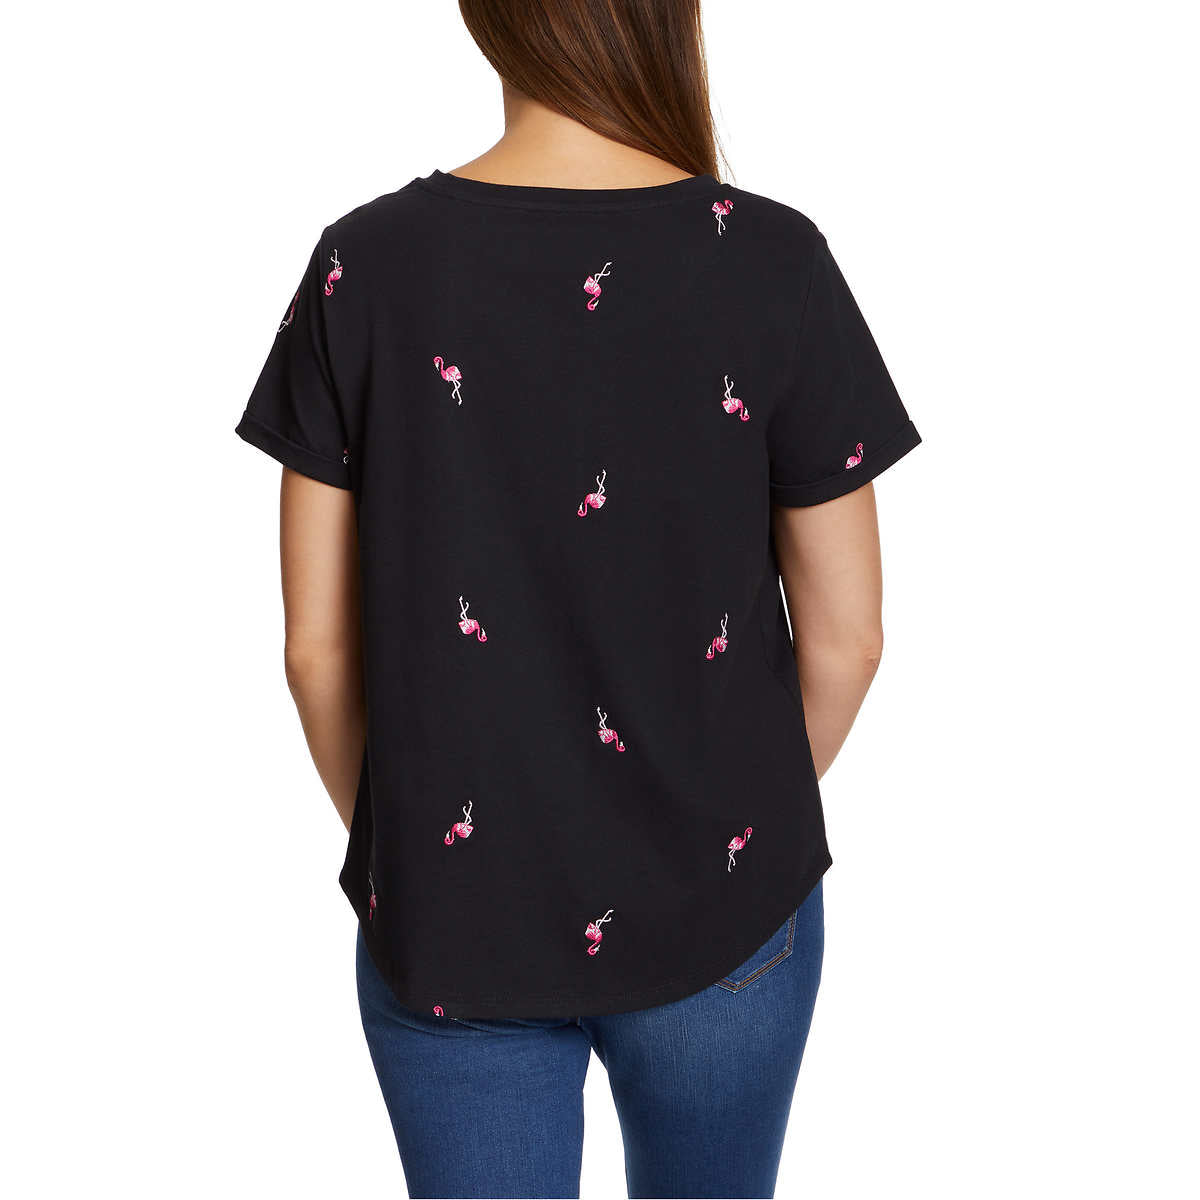 Vintage America Women's Flamingos Embroidered Relaxed Fit Tee Lightweight Cotton Blend T-Shirt